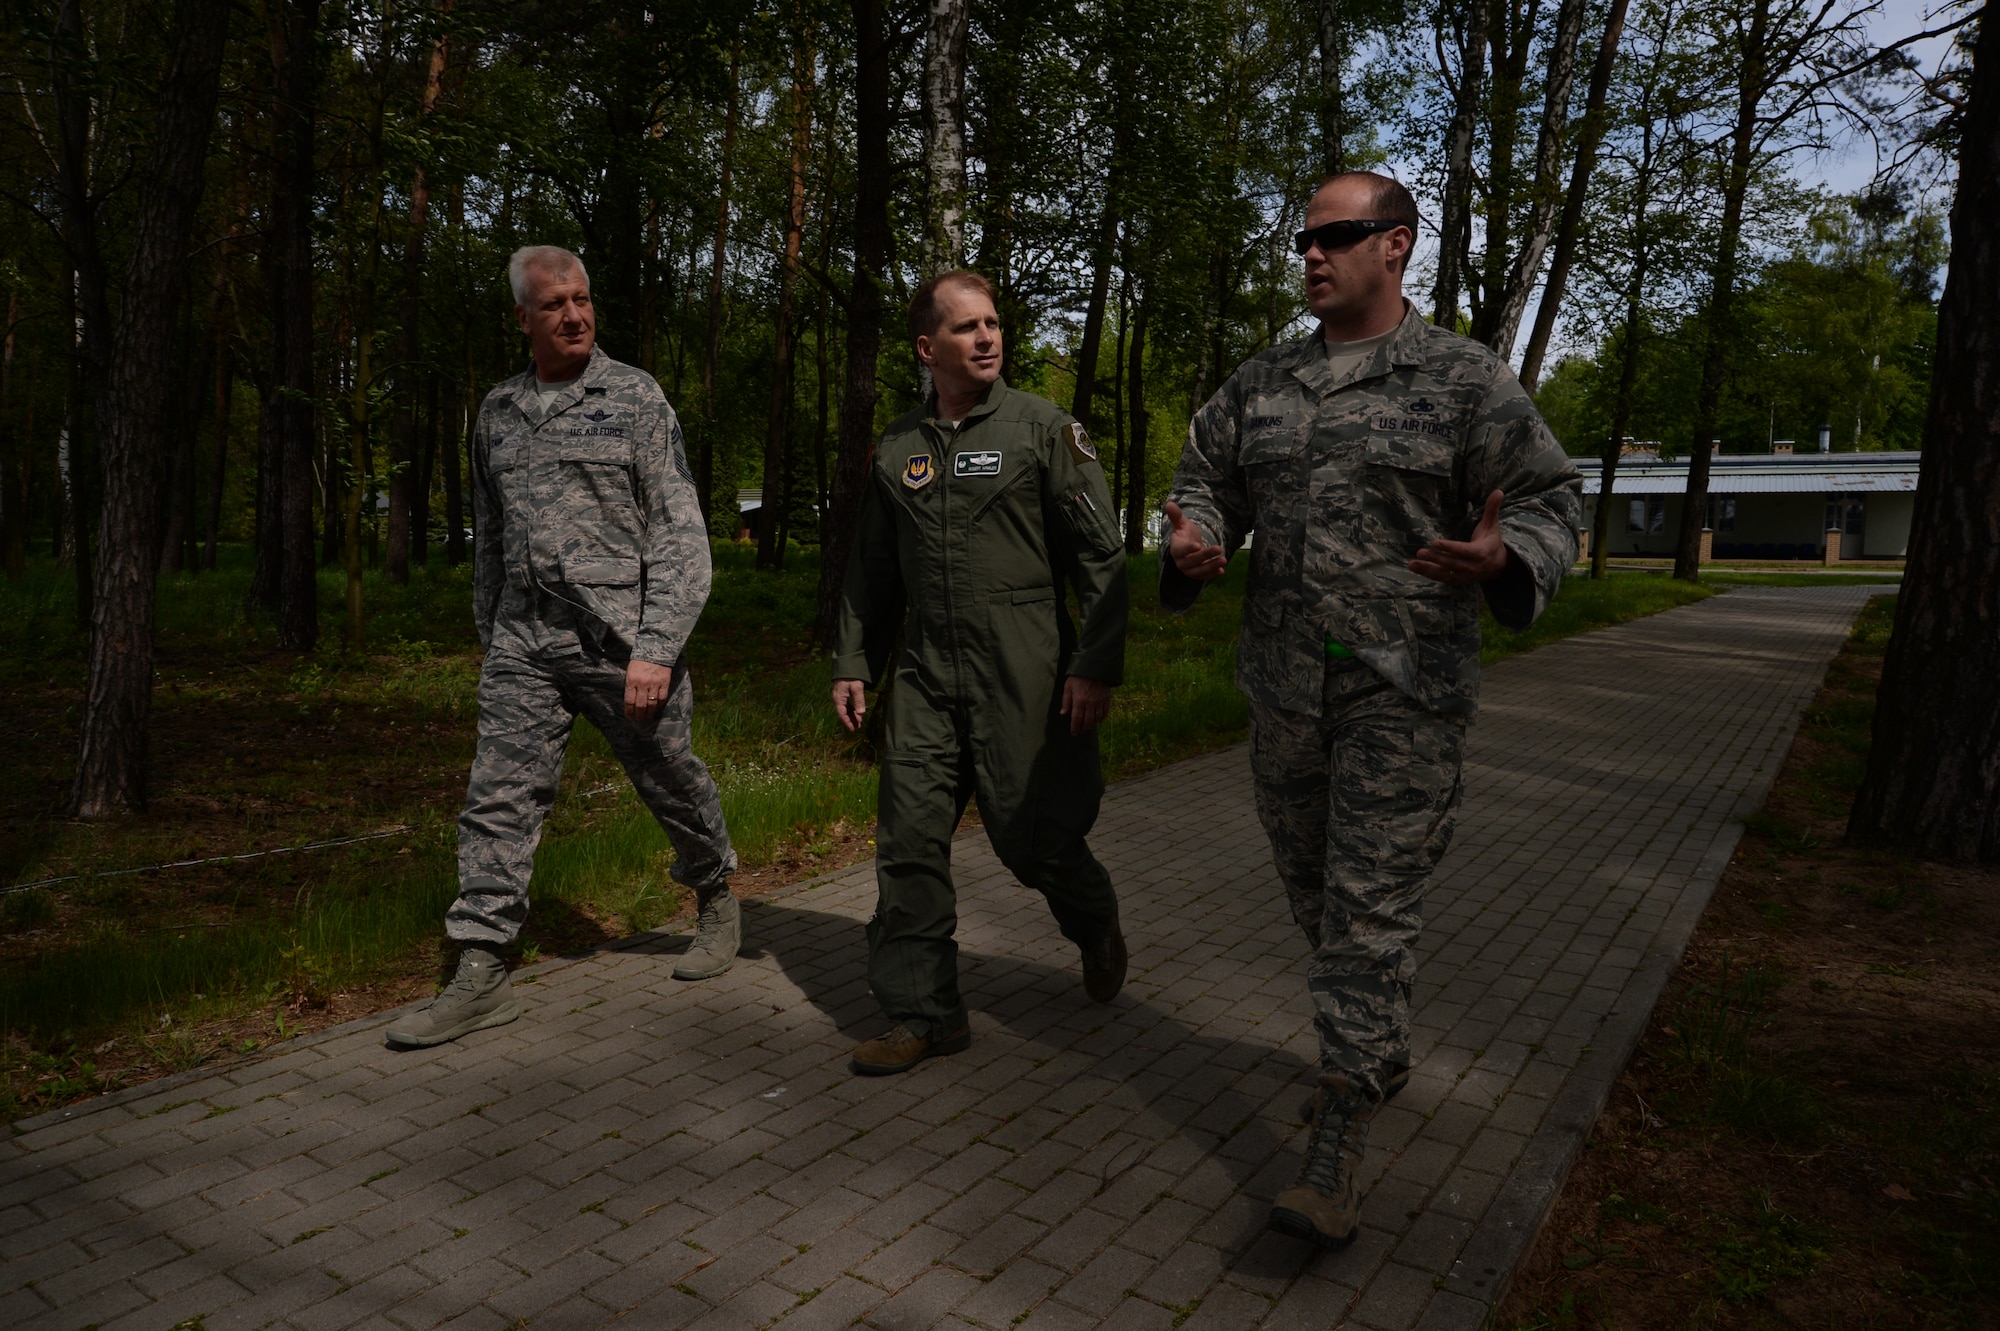 U.S. Air Force Col. Robert Winkler, 52nd Operations Group commander, center, and Chief Master Sgt. Bruce Zahn, 52nd OG chief enlisted manager, left, listen as Master Sgt. Mark Dawkins, Detachment 1, 52nd Operations Group maintenance operations liaison, right, discusses maintenance operations while walking to the flightline at Łask Air Base, Poland, May 7, 2014. Dawkins serves with nine other personnel assigned to Detachment 1, which aims to strengthen interoperability between the U.S. and Polish air forces.   (U.S. Air Force photo by Staff Sgt. Joe W. McFadden/Released)